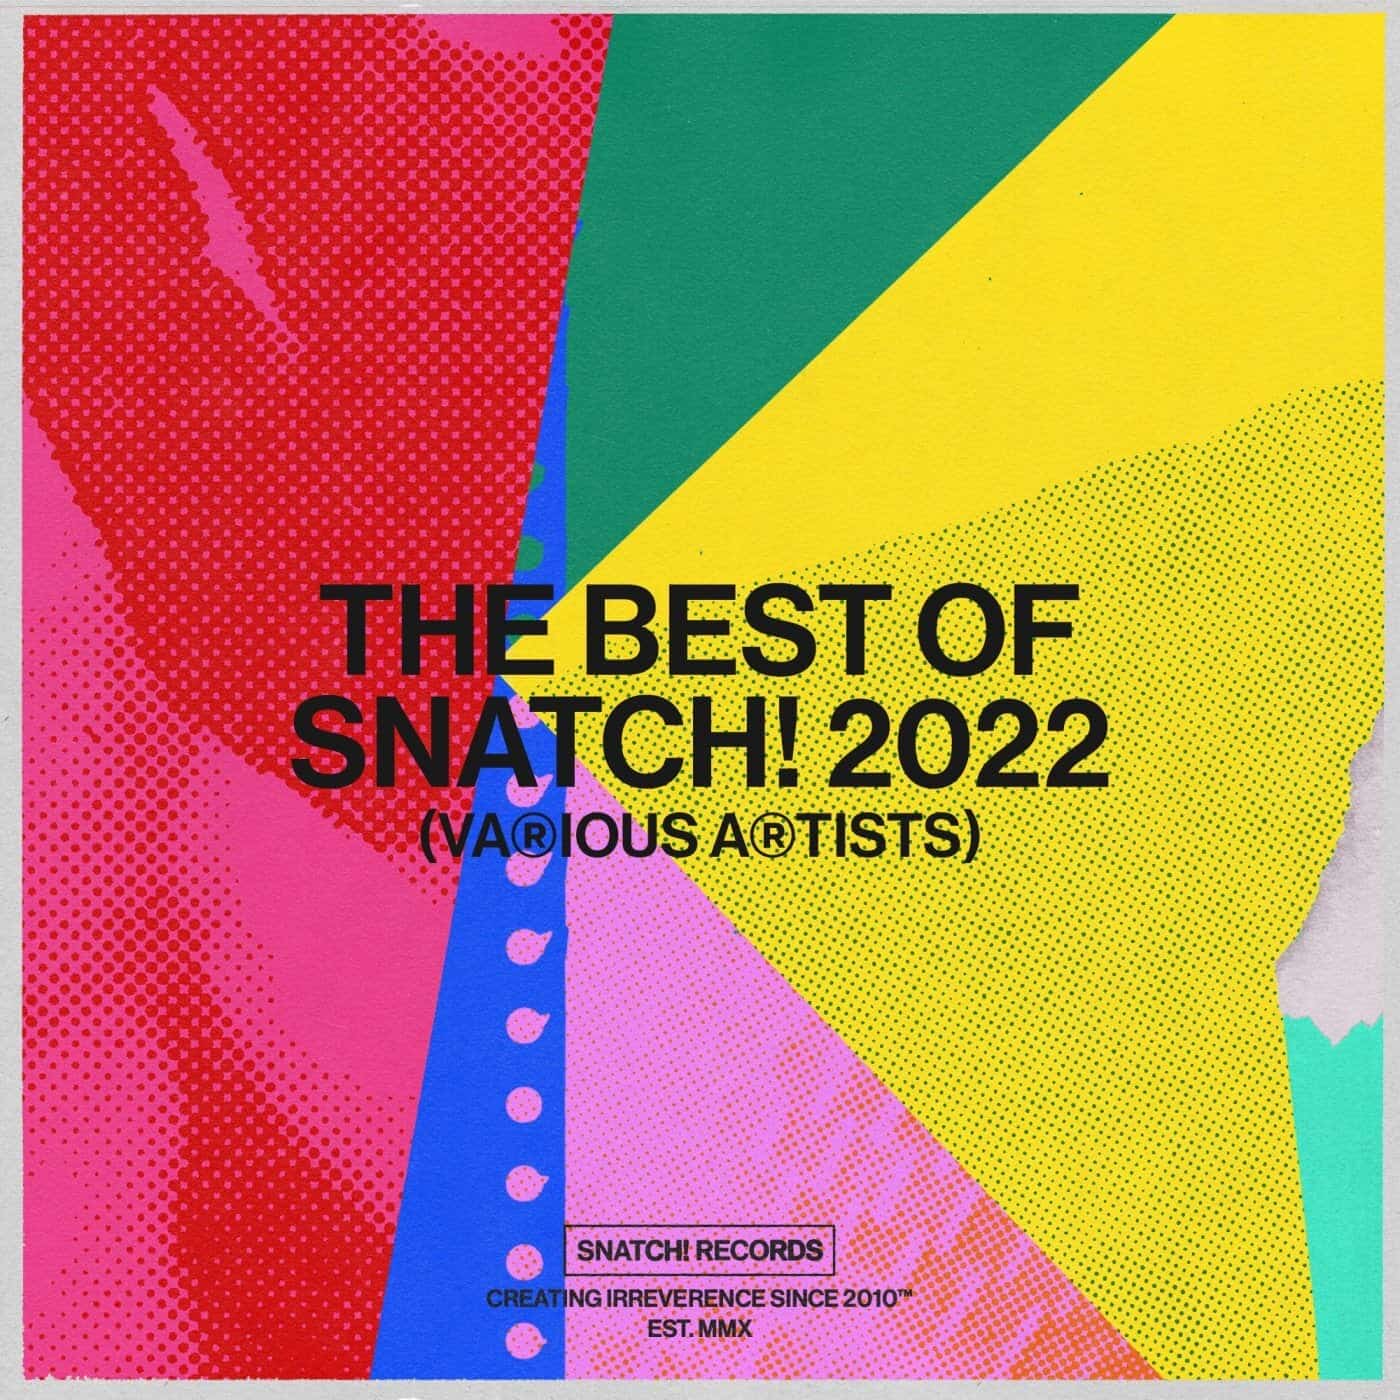 Download VA - The Best Of Snatch! 2022 on Electrobuzz